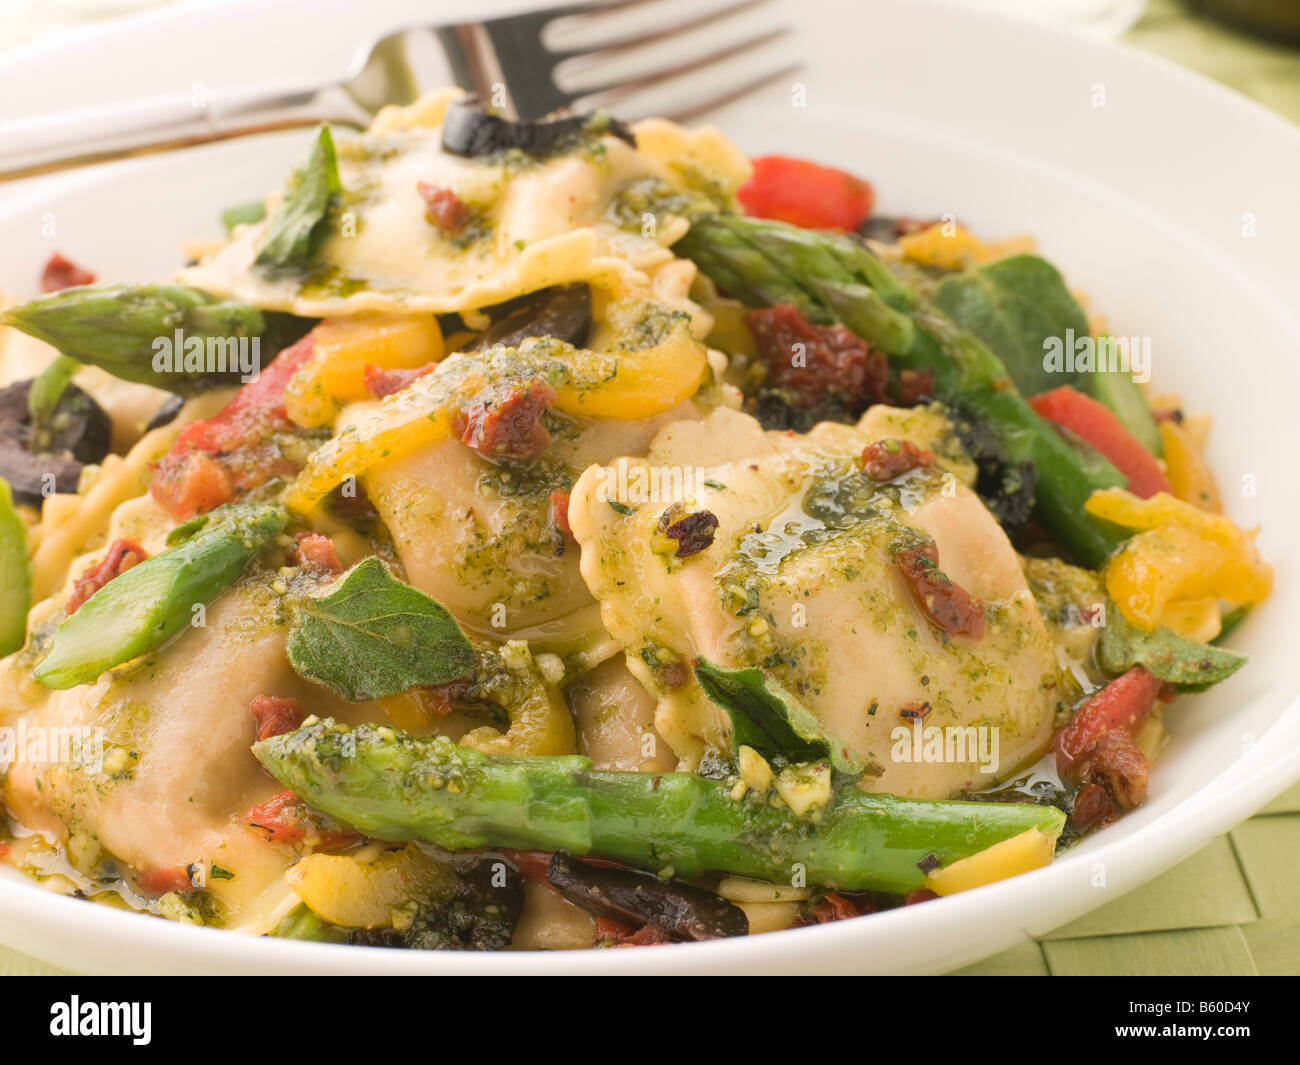 Roasted Vegetable Ravioli with Pesto Dressing Sun Blushed Tomatoes and Asparagus Stock Photo